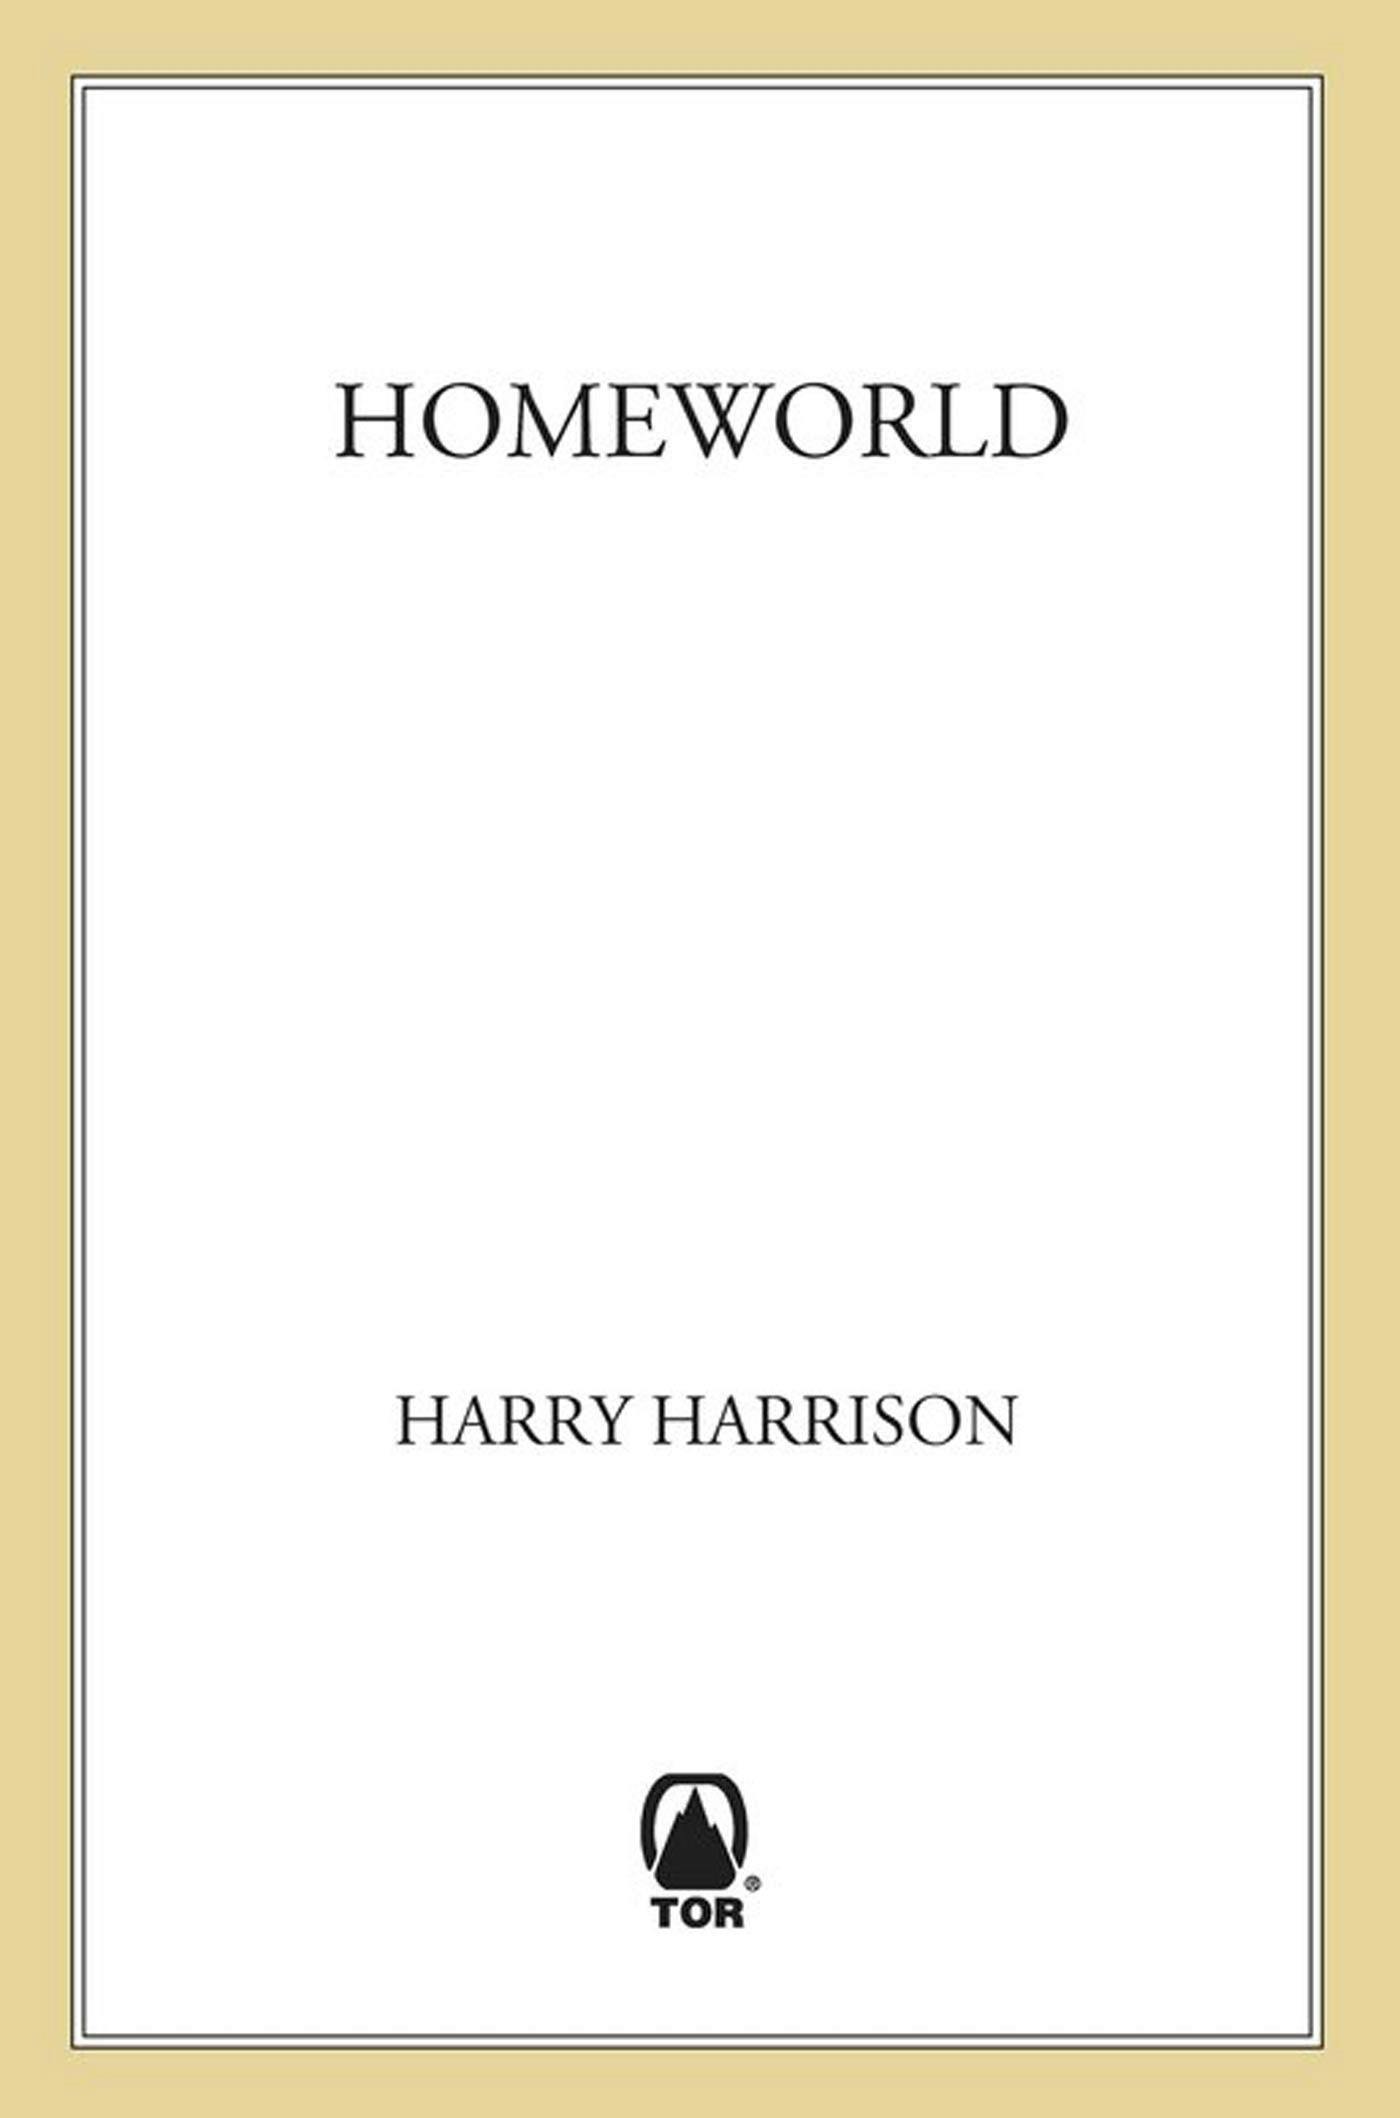 Cover for the book titled as: Homeworld